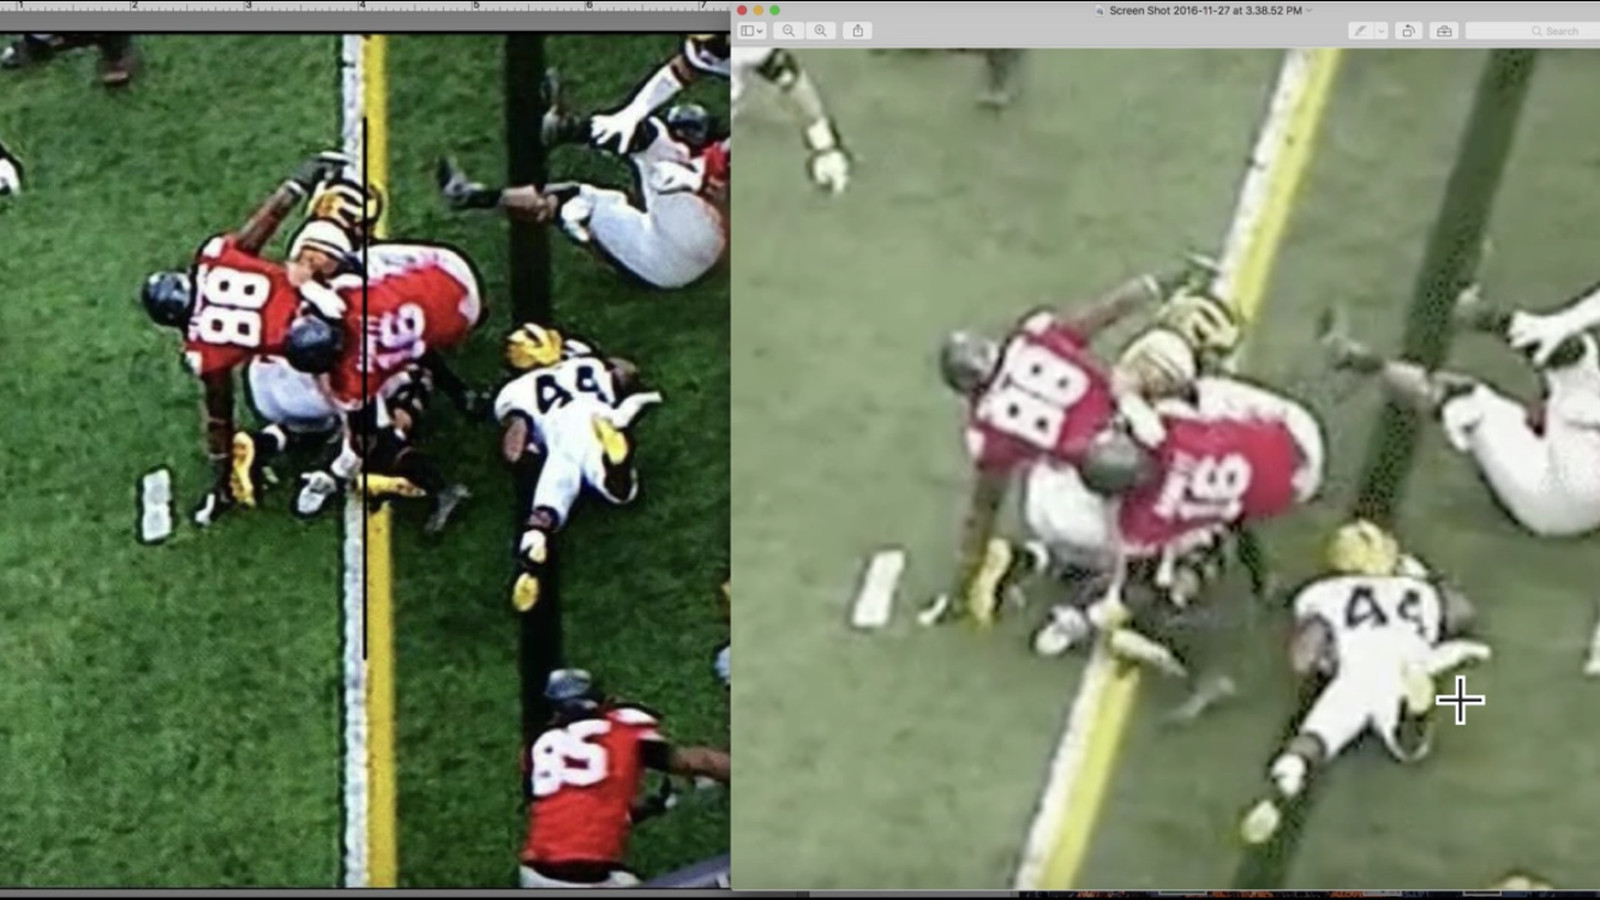 This ohio state fans video might convince even a michigan fan that the call was right